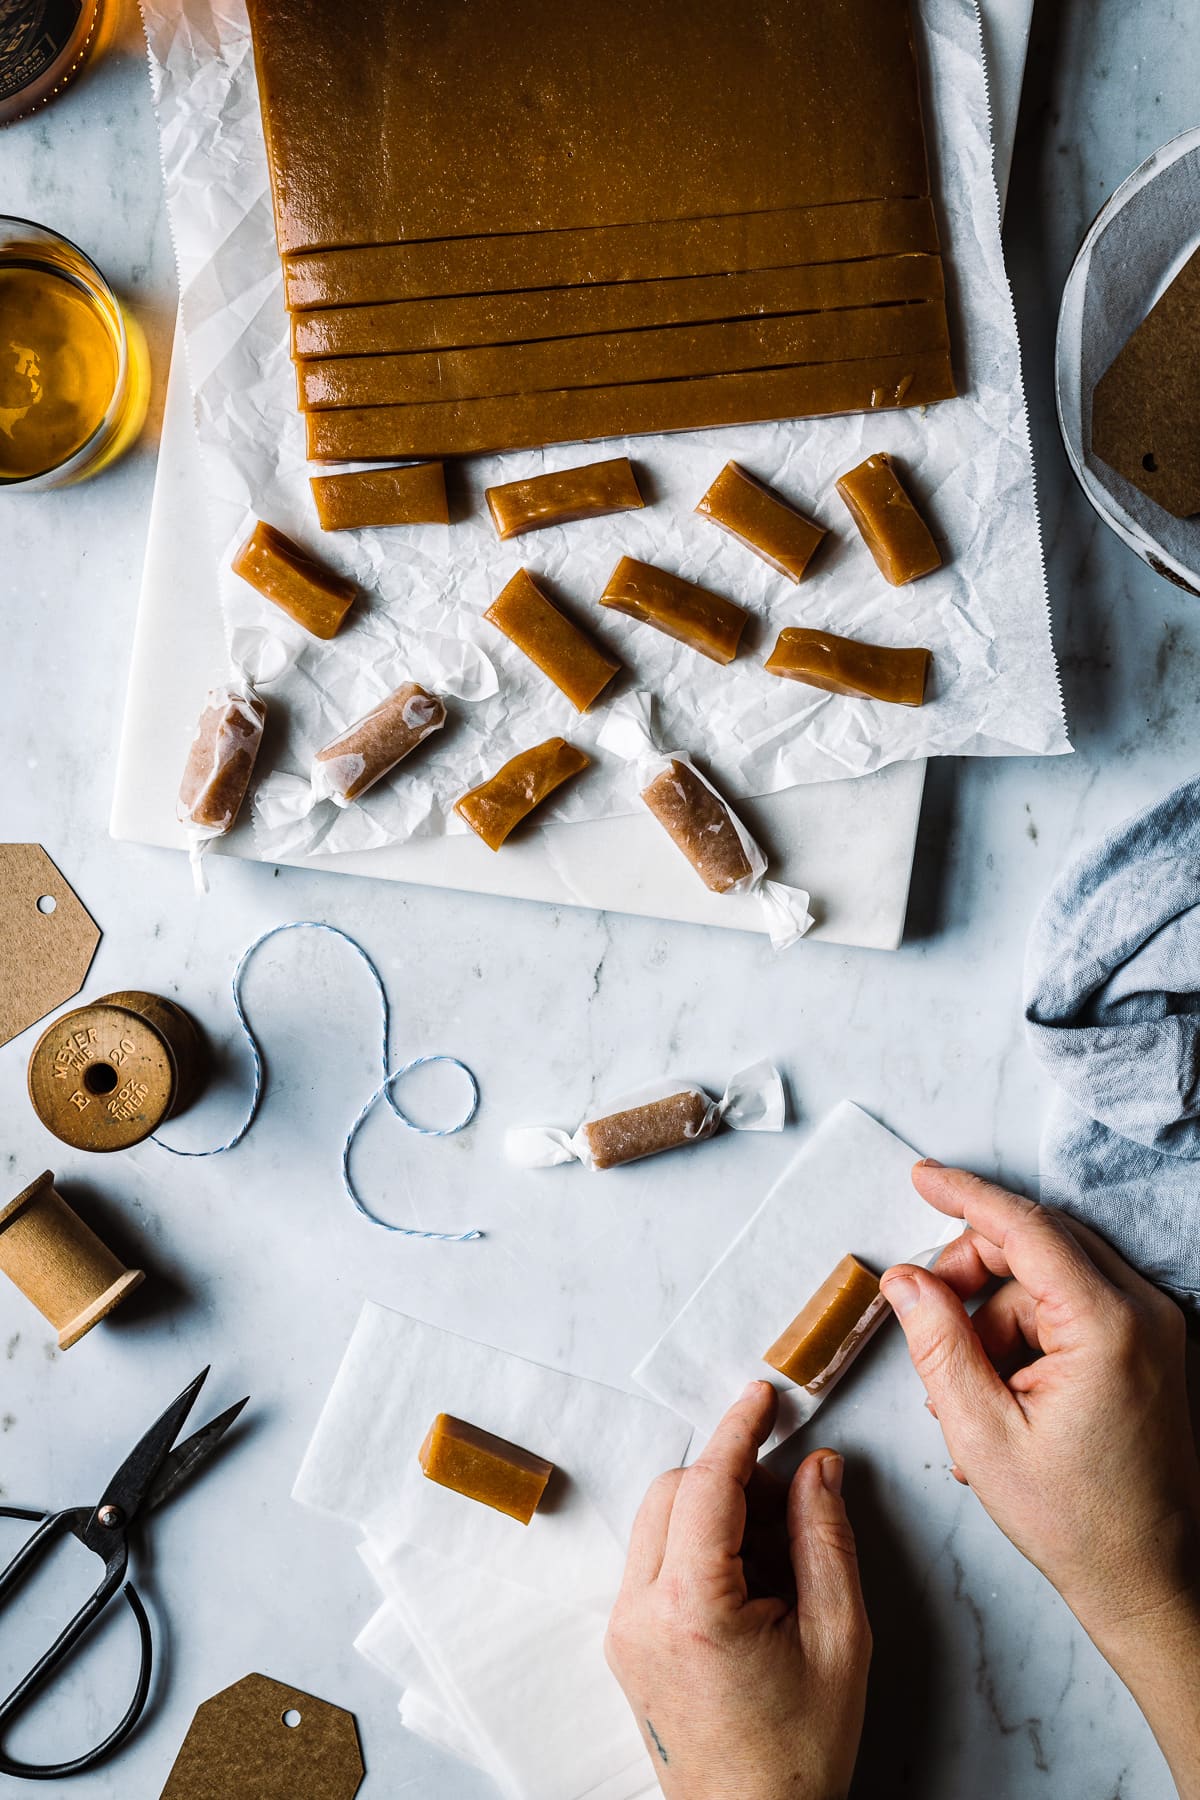 A batch of candy being cut into individual pieces and wrapped. The work surface is grey marble. There are paper candy wrappers, a vintage spool of twine, and scissors nearby. White hands reach into the frame to wrap a piece of candy in paper.